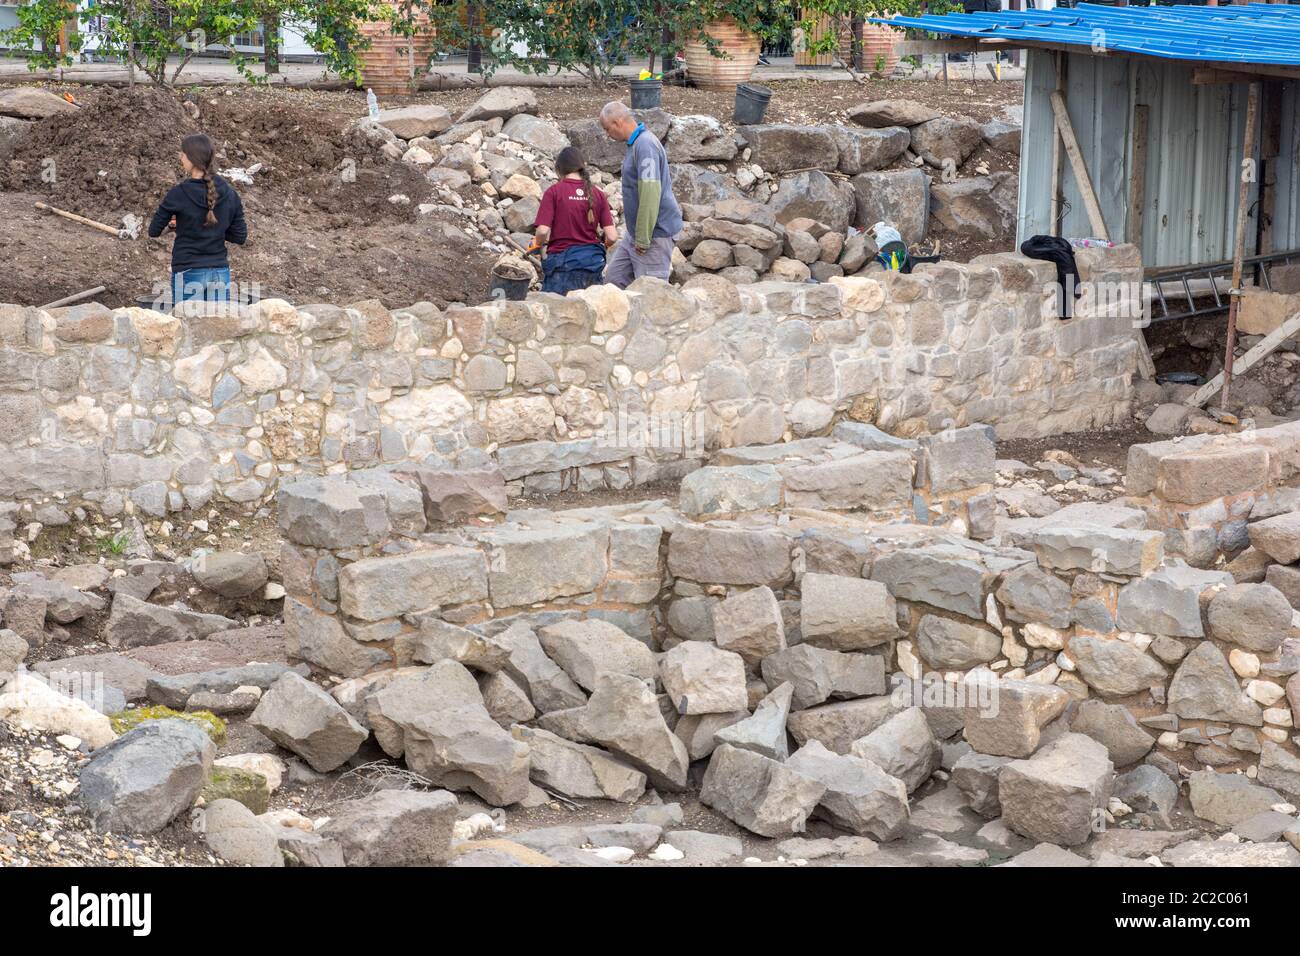 A team of archaeologists aided by a group of young volunteers is excavating an ancient site and ruins. Photographed at Magdala (Mejdel) - current day Stock Photo